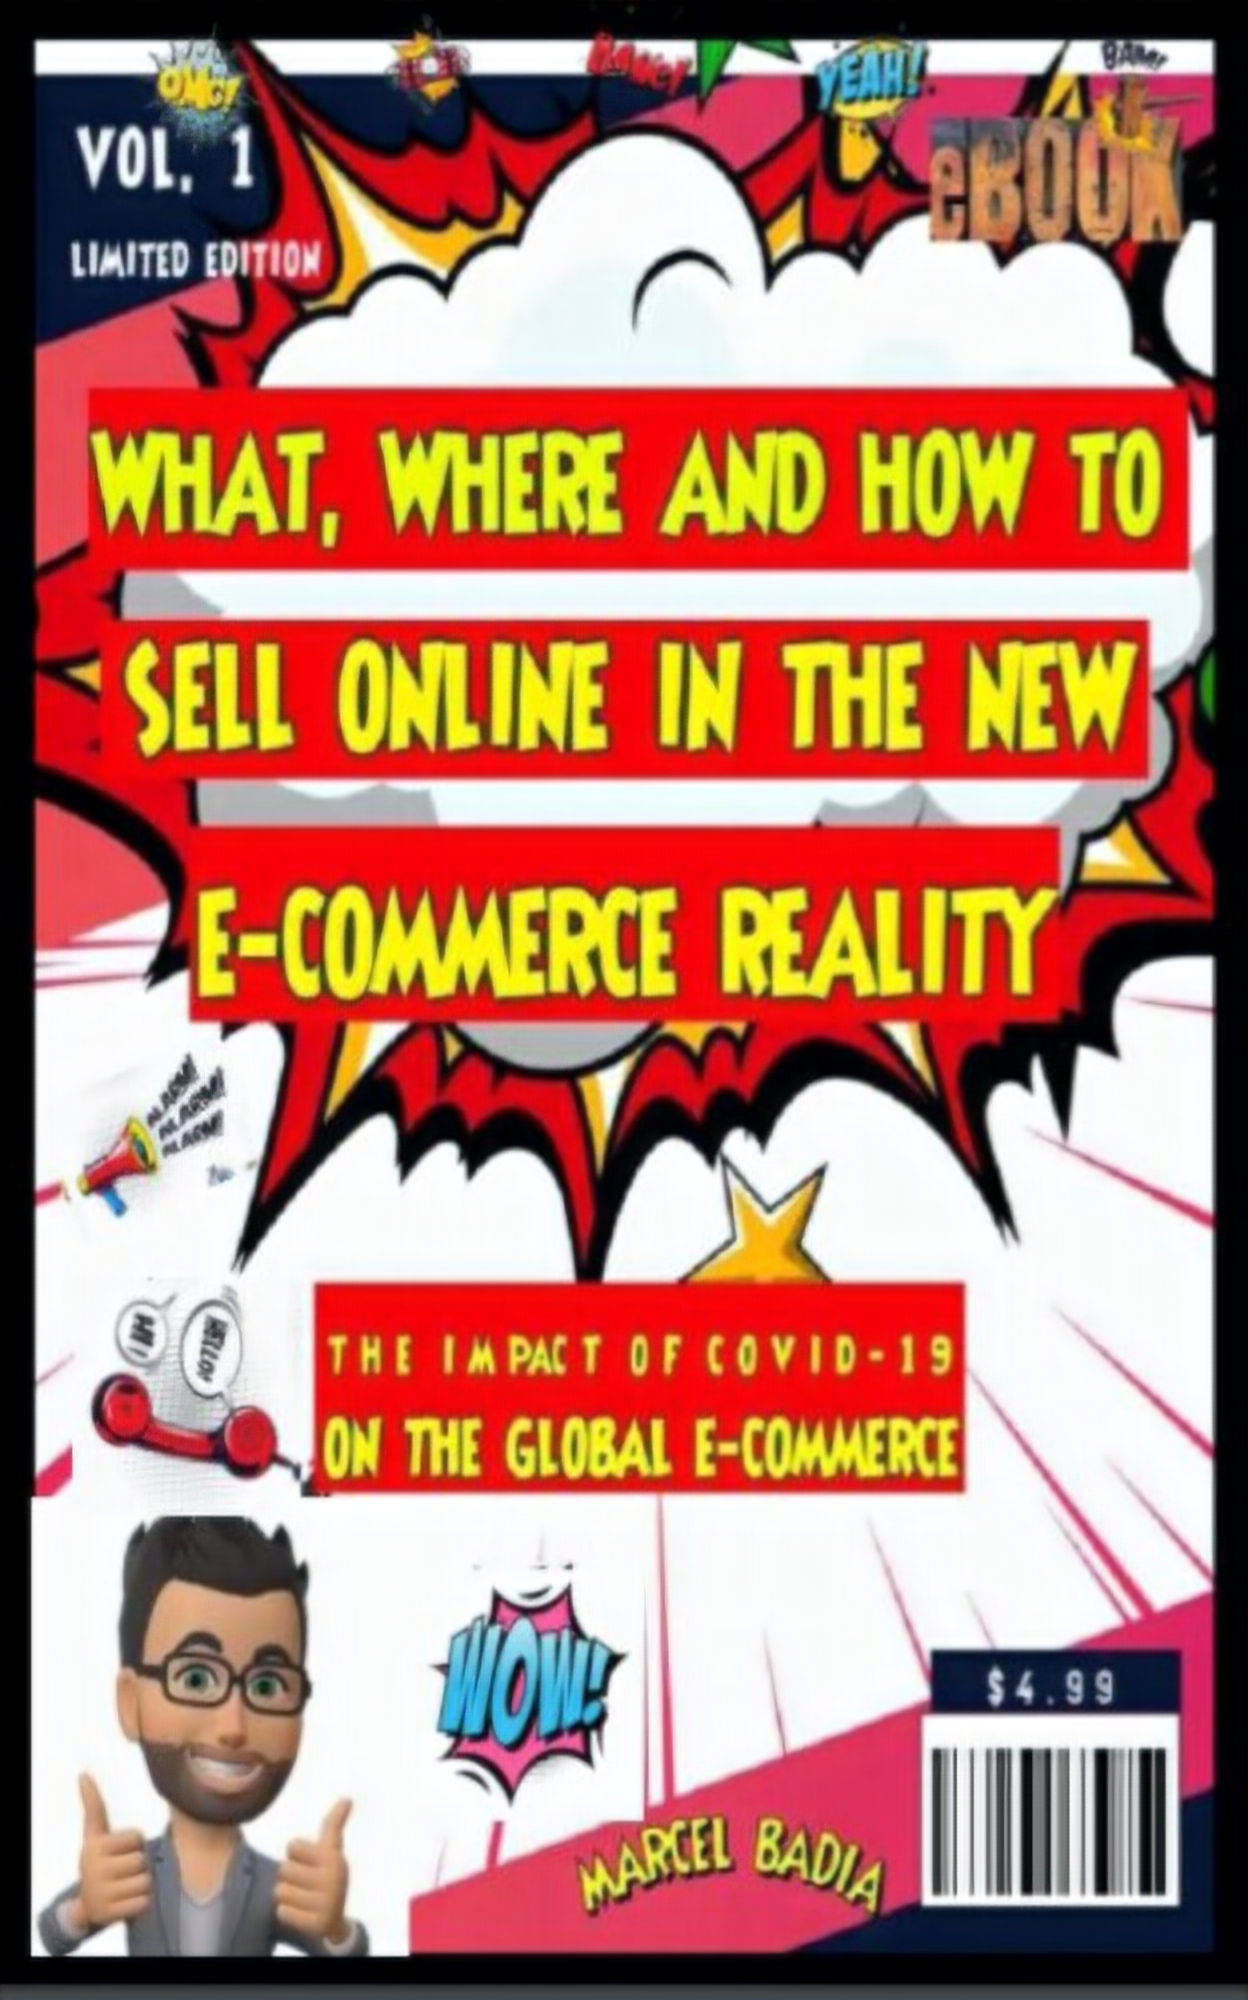 WHAT, WHERE AND HOW TO SELL ONLINE IN THE NEW E-COMMERCE REALITY. FREE DOWNLOAD!!